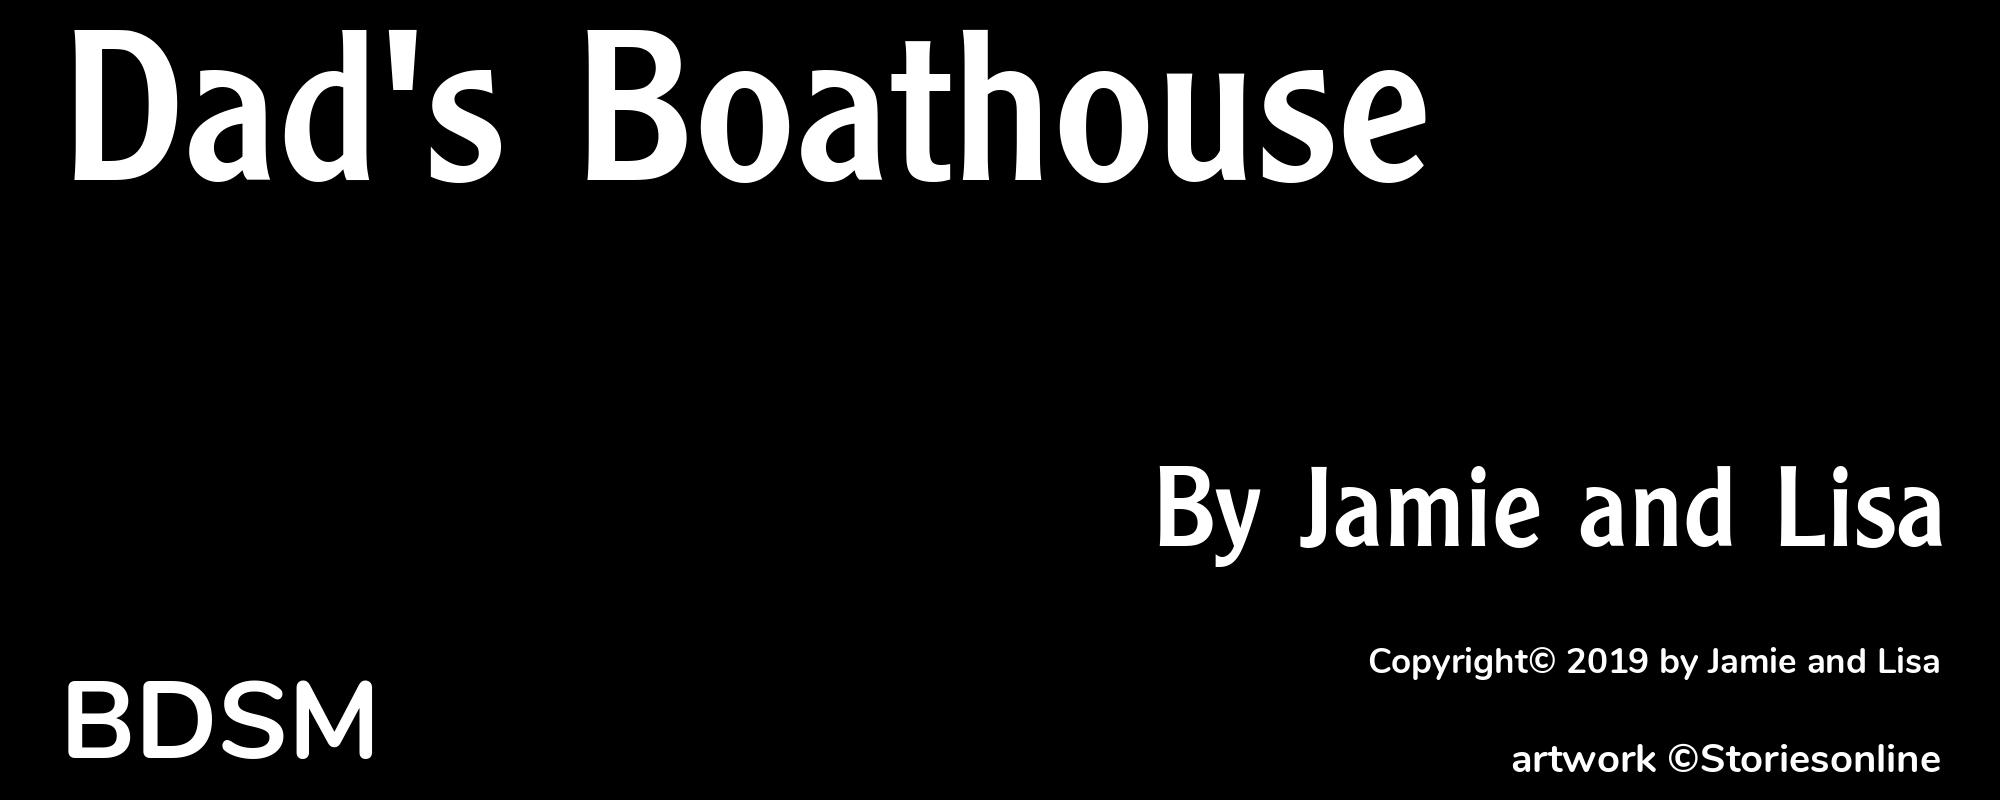 Dad's Boathouse - Cover